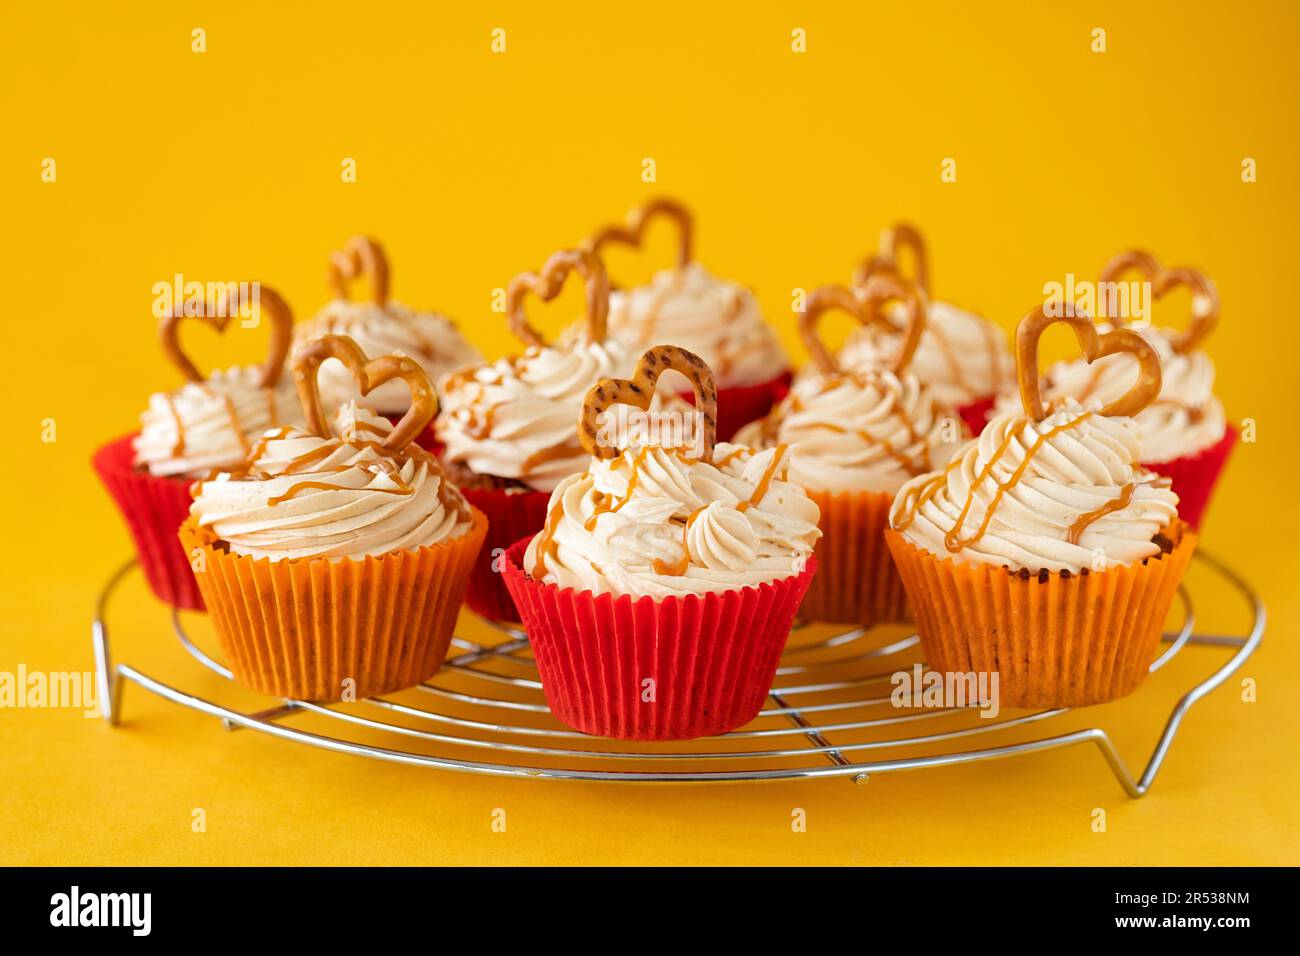 A batch of home made caramel pretzel cupcakes. The cakes are shown on a cooling rack and have a buttercream topping decorated with a pretzel Stock Photo